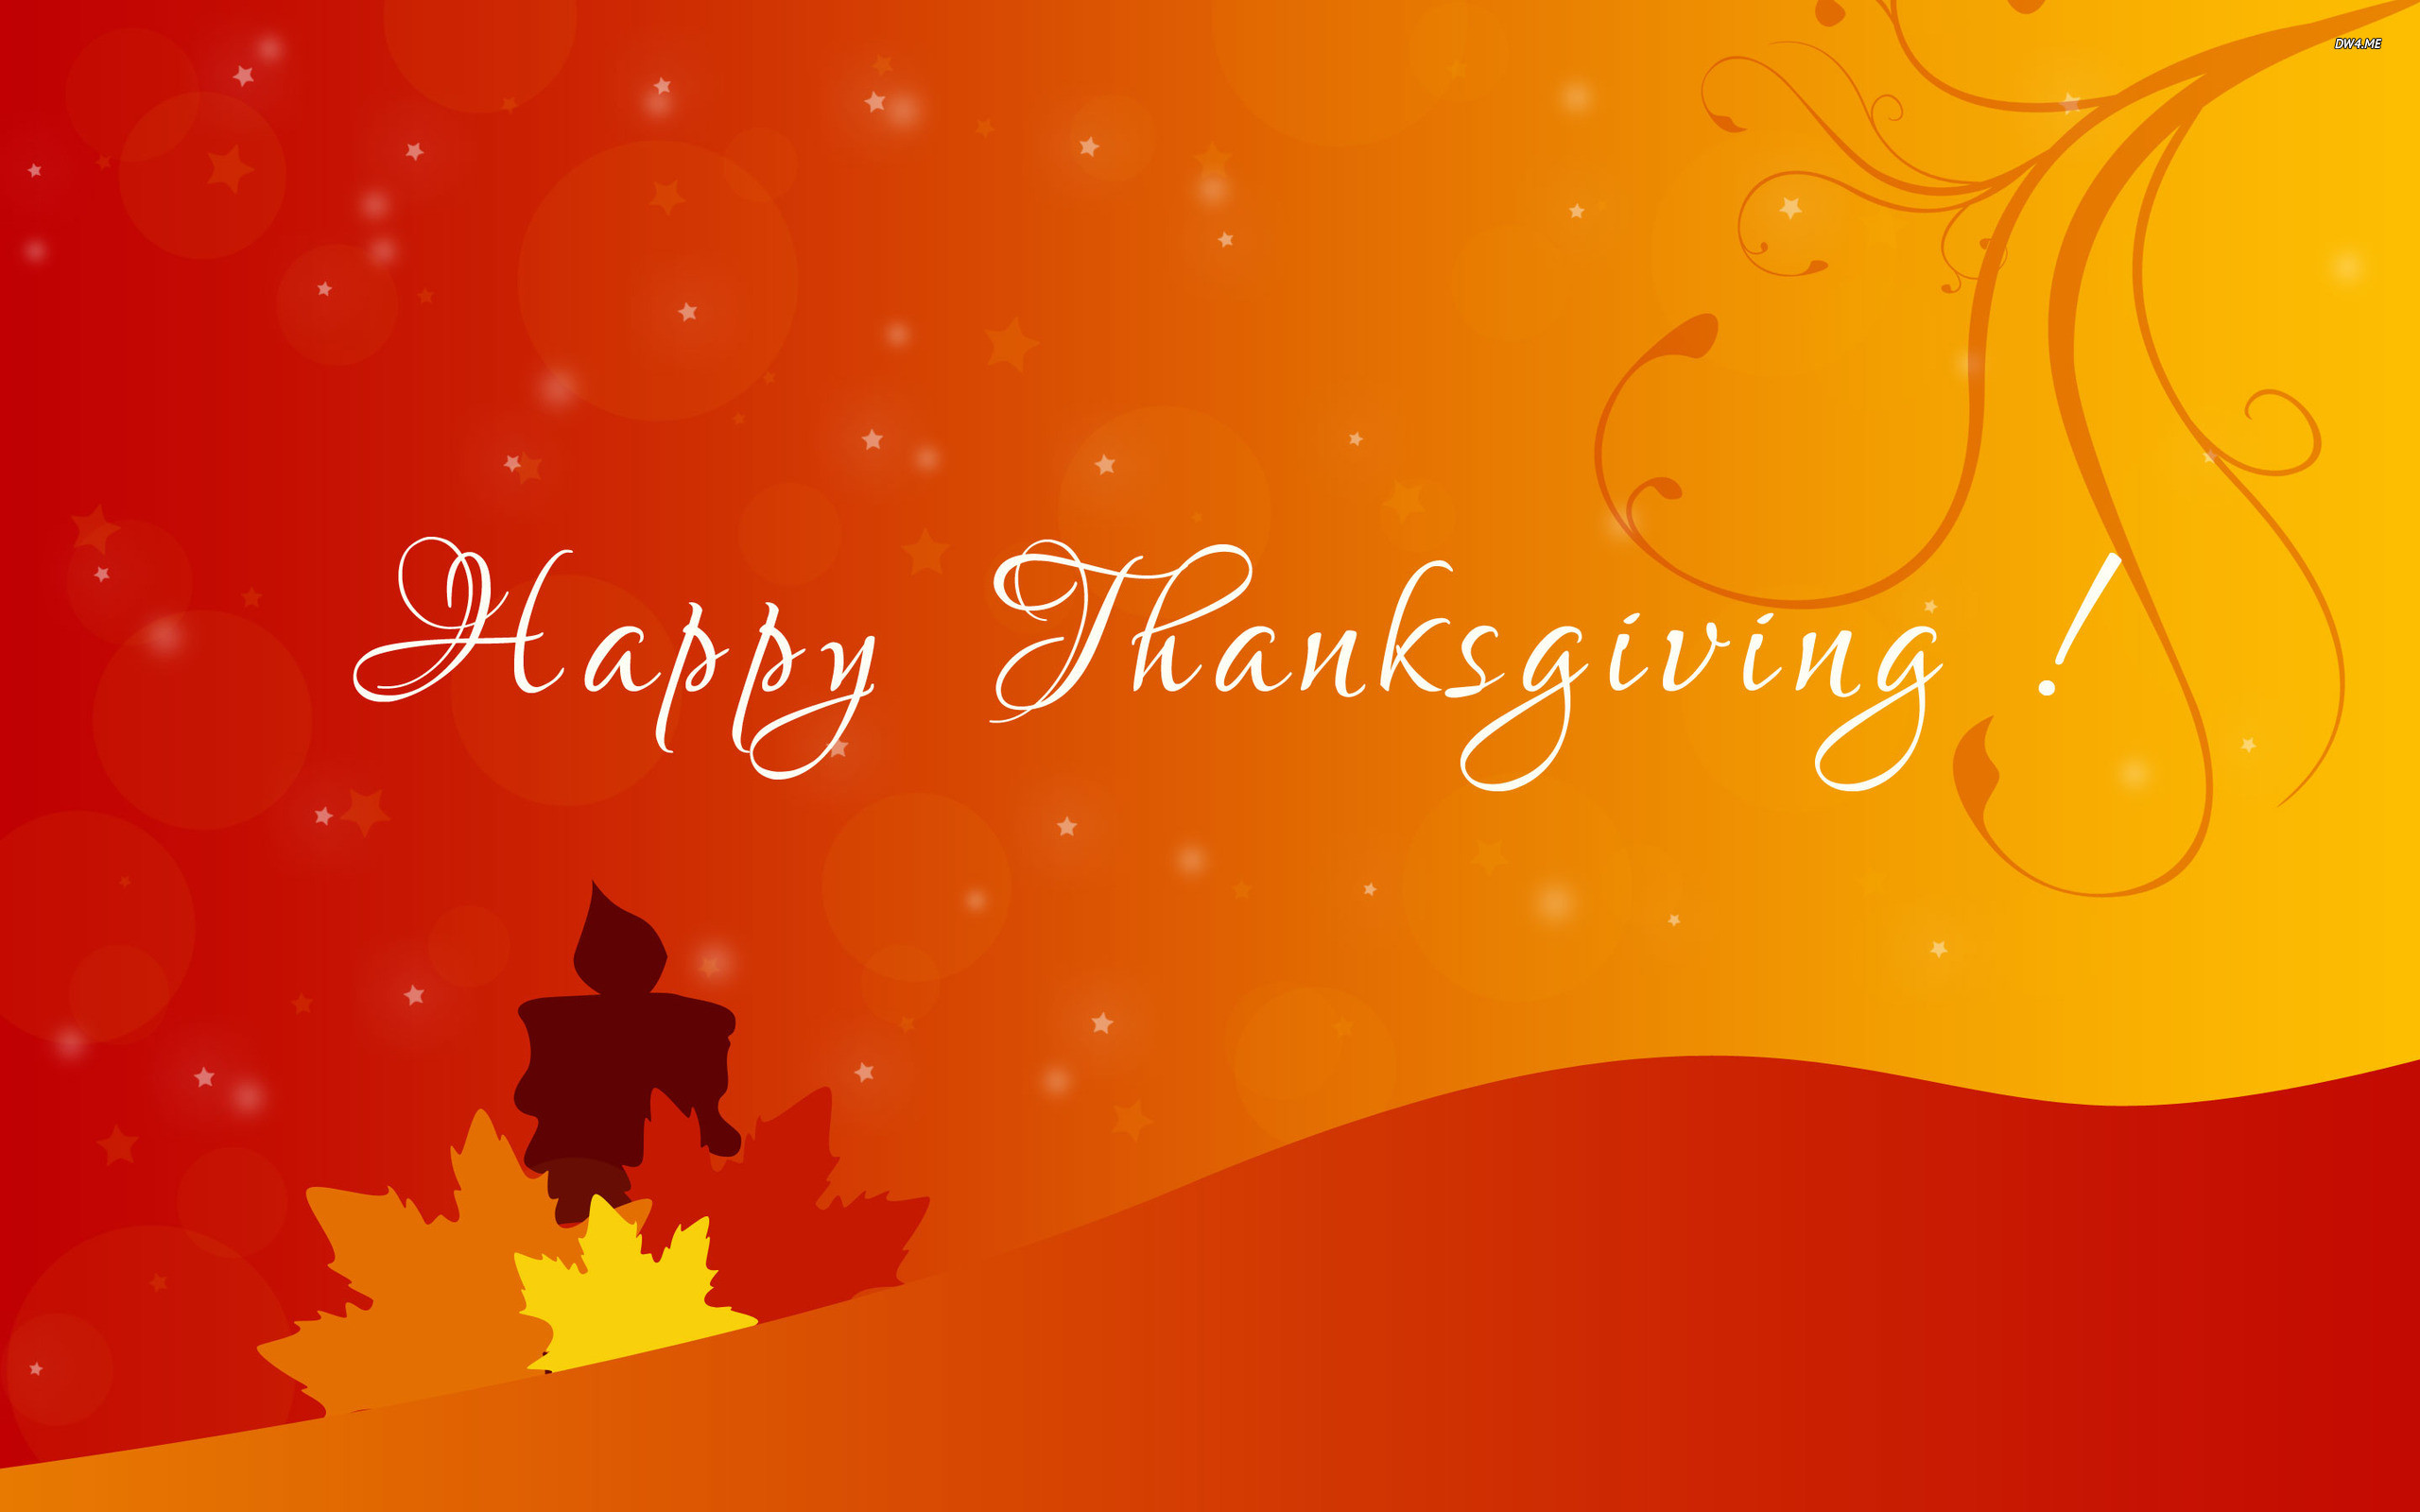 2560x1600 Happy Thanksgiving wallpaper Holiday wallpapers #1858 #4006